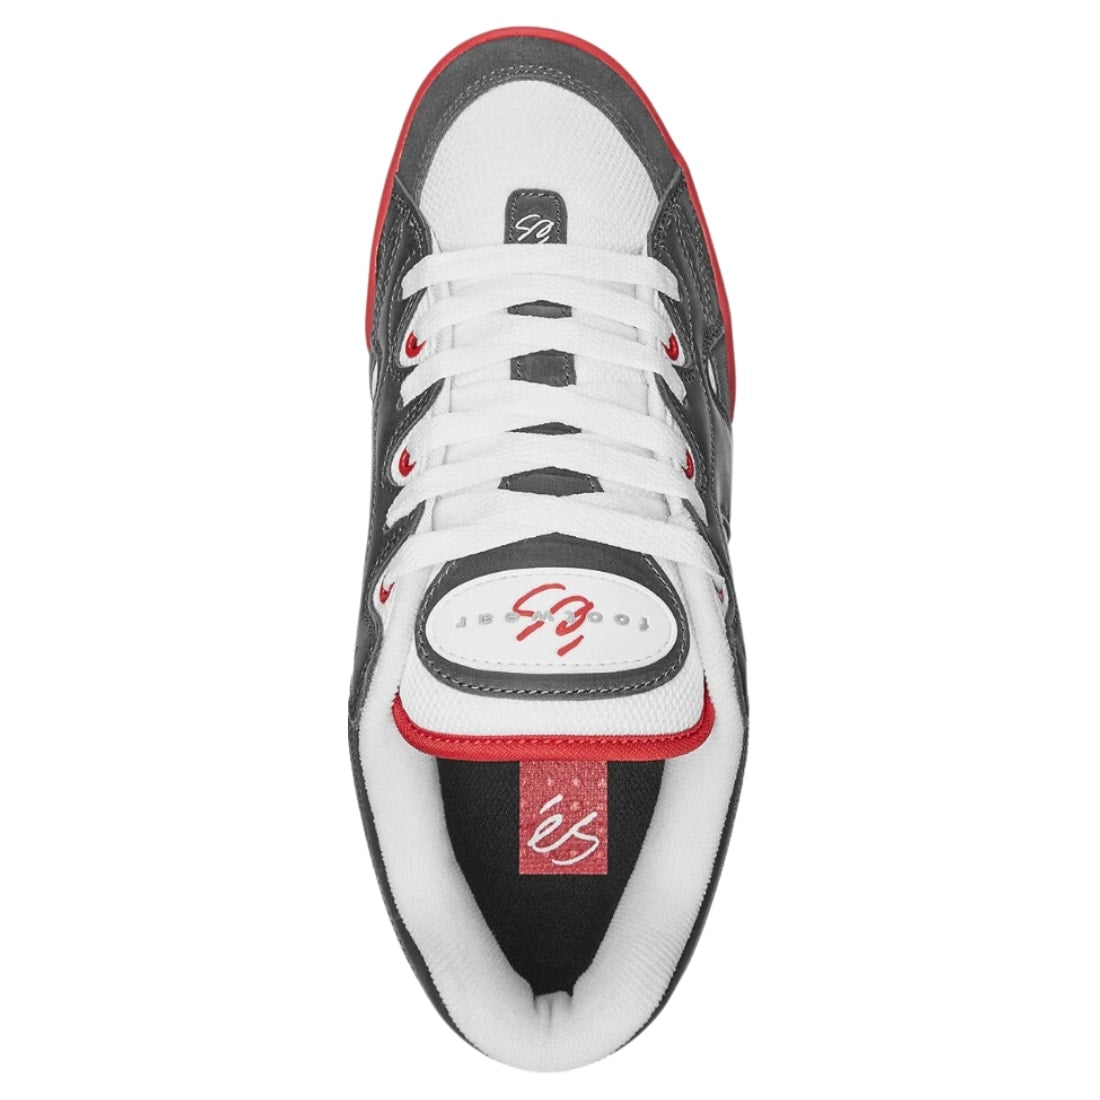 Es One Nine 7 Skate Shoes - Grey/White/Red - Mens Skate Shoes by eS